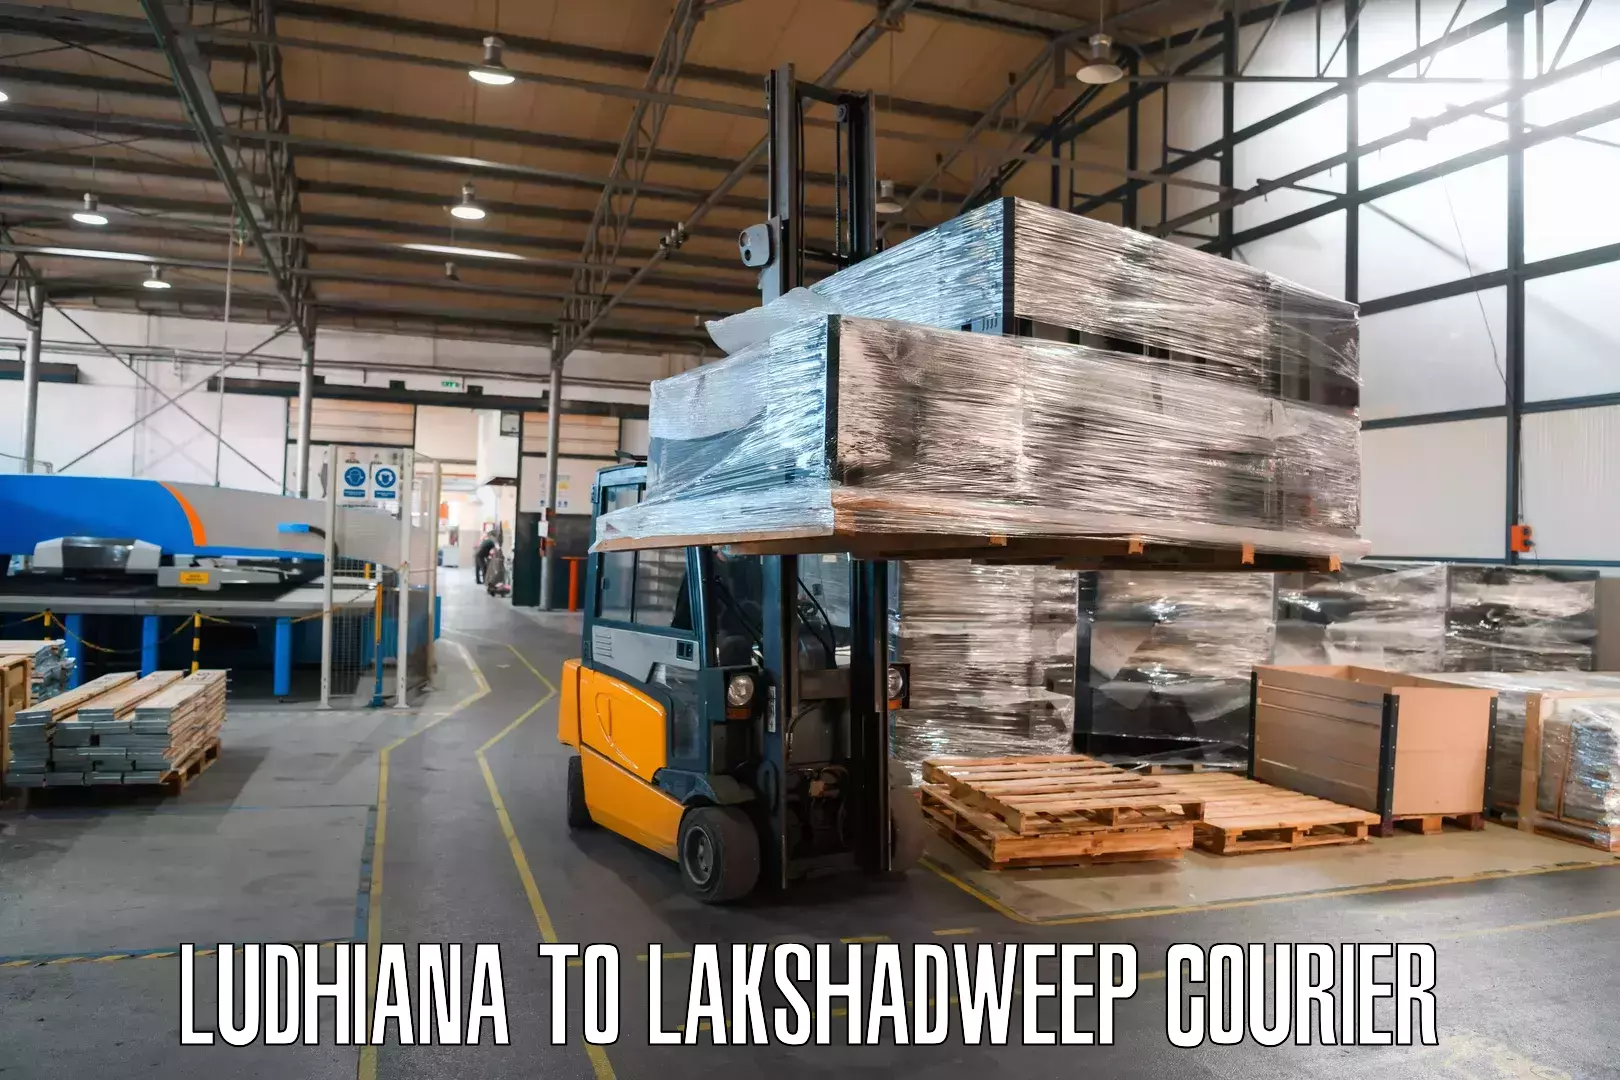 Delivery service partnership Ludhiana to Lakshadweep